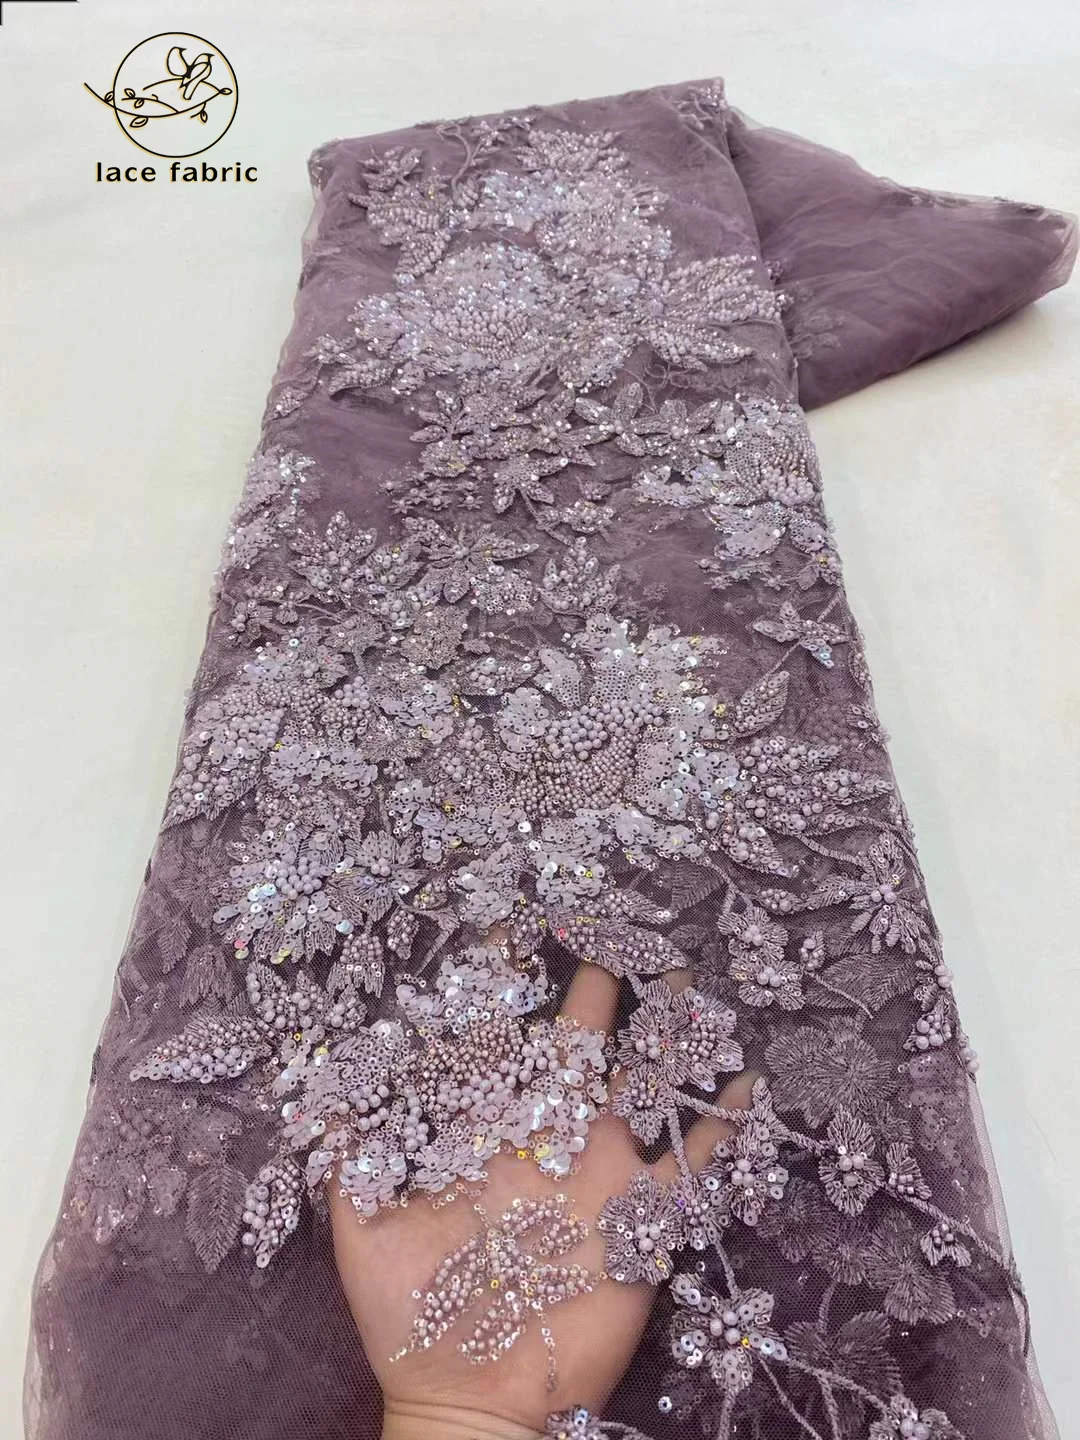 2023 Latest Nigerian Sequins Lace Fabric Heavy Hand Beaded Lace Fabric Luxury French Embroidery Beads Lace Fabric For Wedding latest royal african lace fabric 2023 luxury french sequins mesh beads lace fabric high end handmade beaded for wedding dress